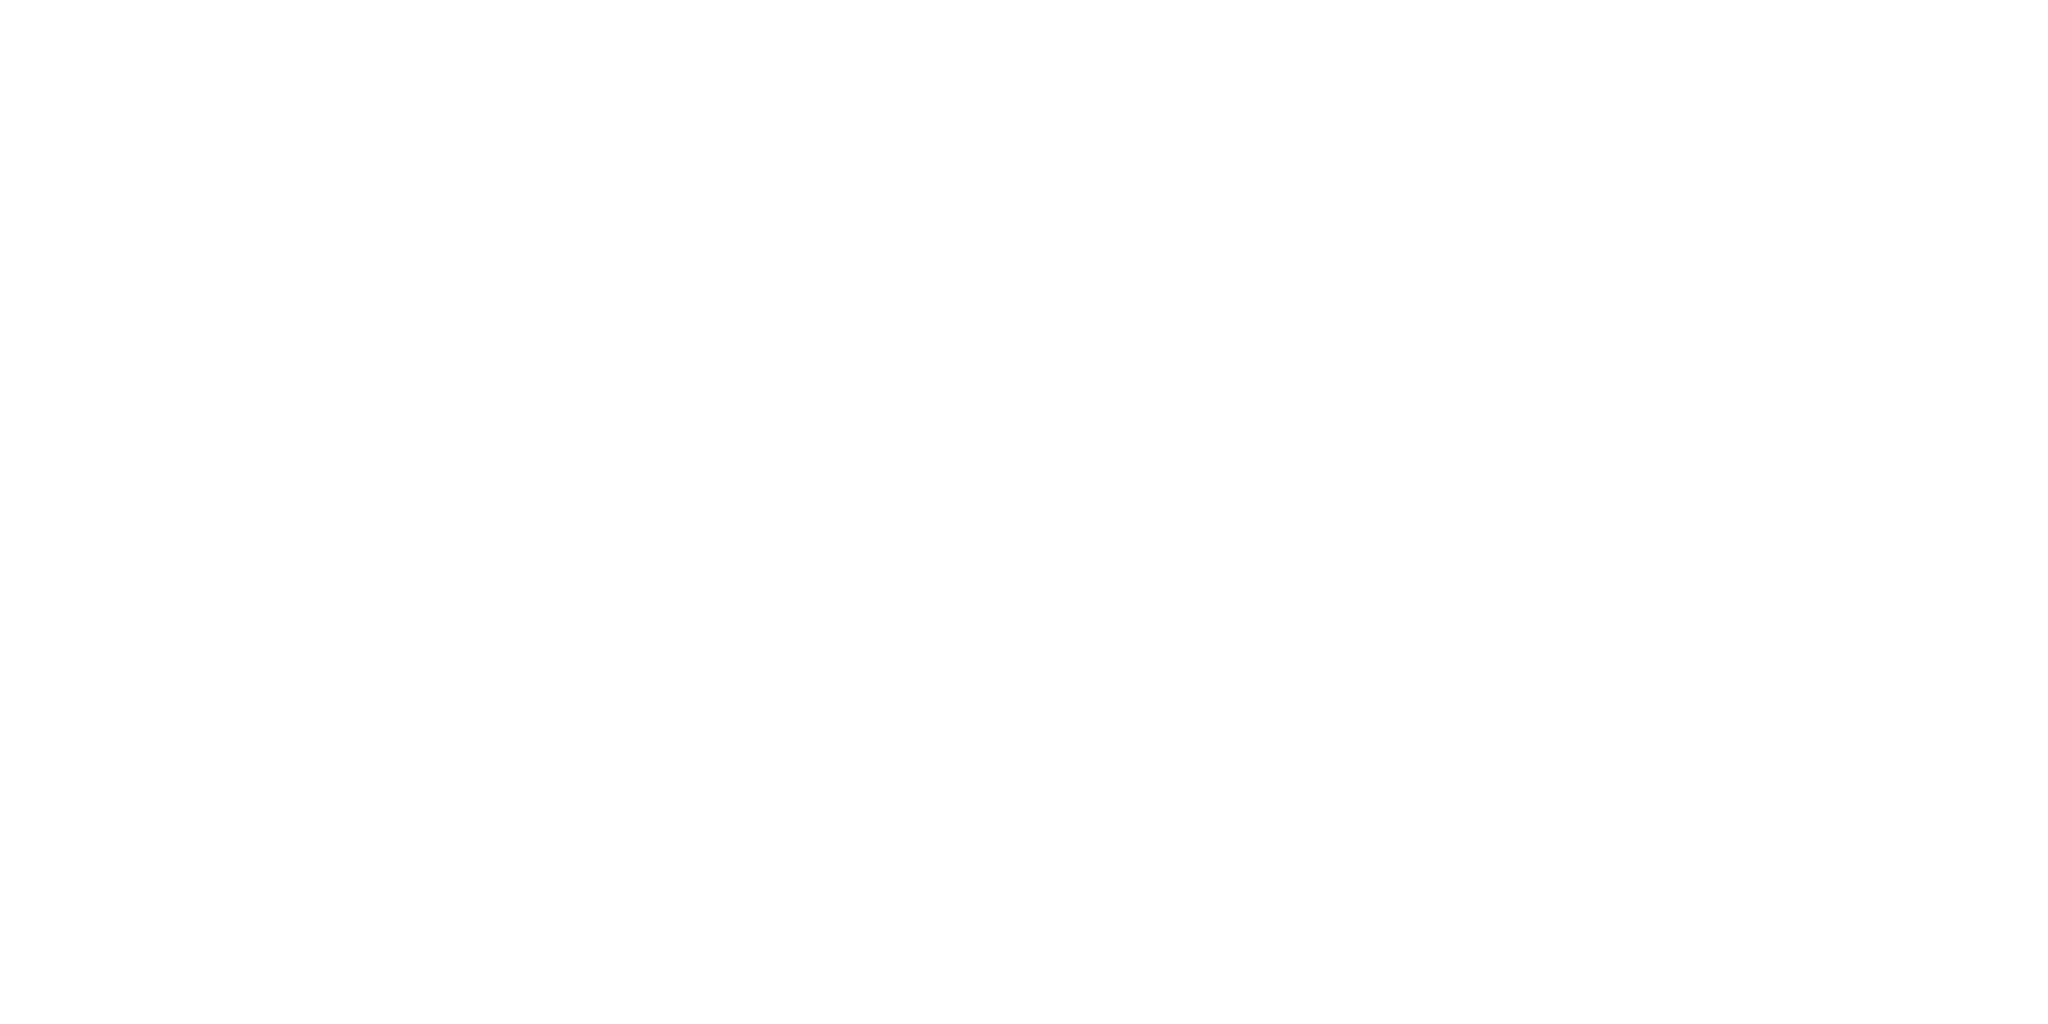 Decay of Logos Wiki